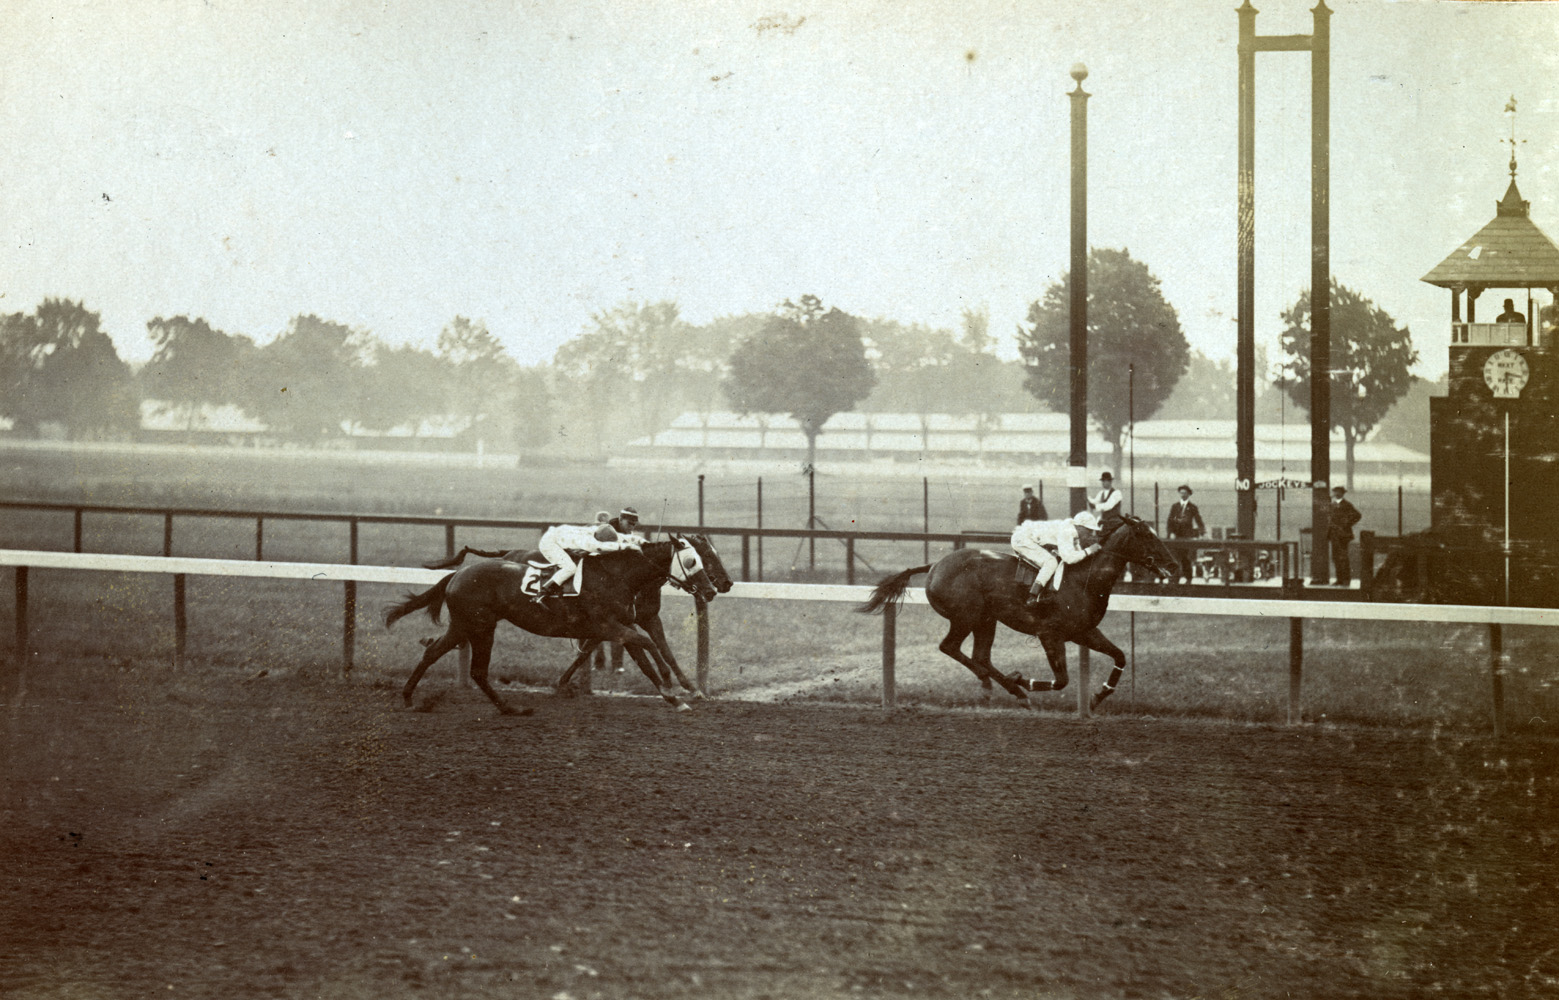 Maskette (Joe Notter up) winning the 1908 Spinaway at Saratoga (Keeneland Library Hemment Collection)